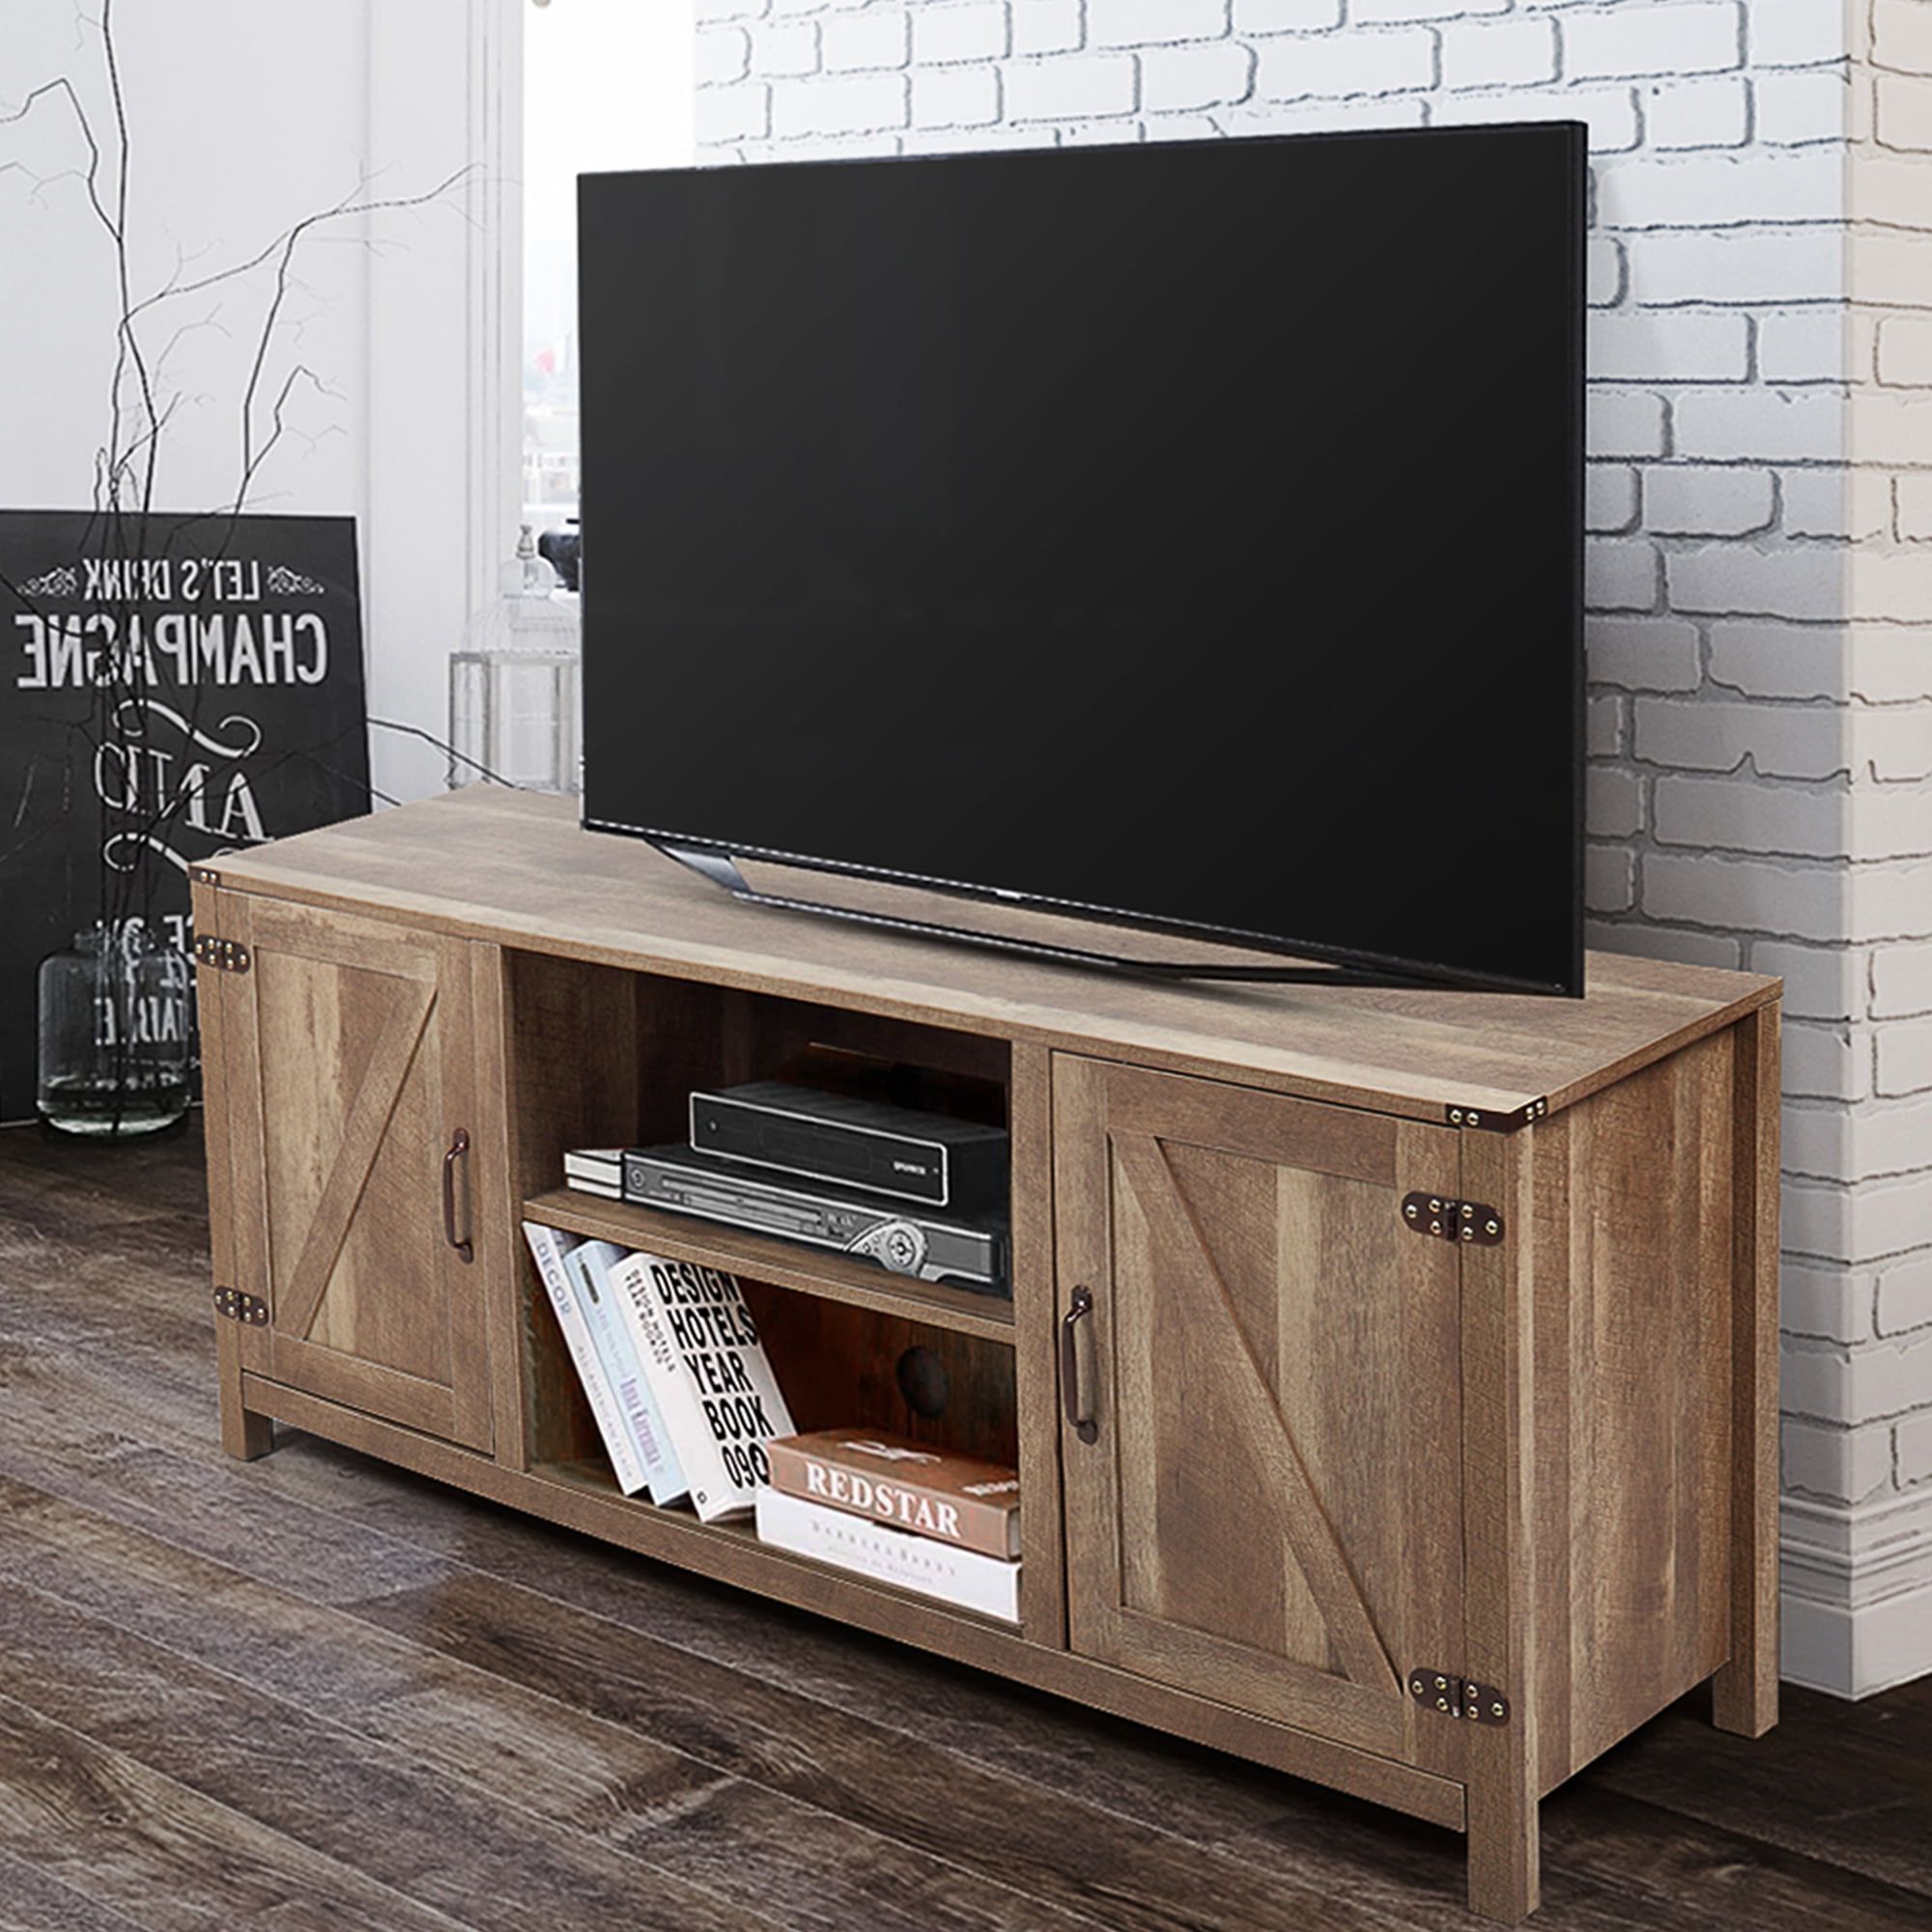 Preferred 110" Tvs Wood Tv Cabinet With Drawers In Jaxpety 58" Farmhouse Barn Door Tv Stand For Tvs Up To 65'', Wooden (View 7 of 15)